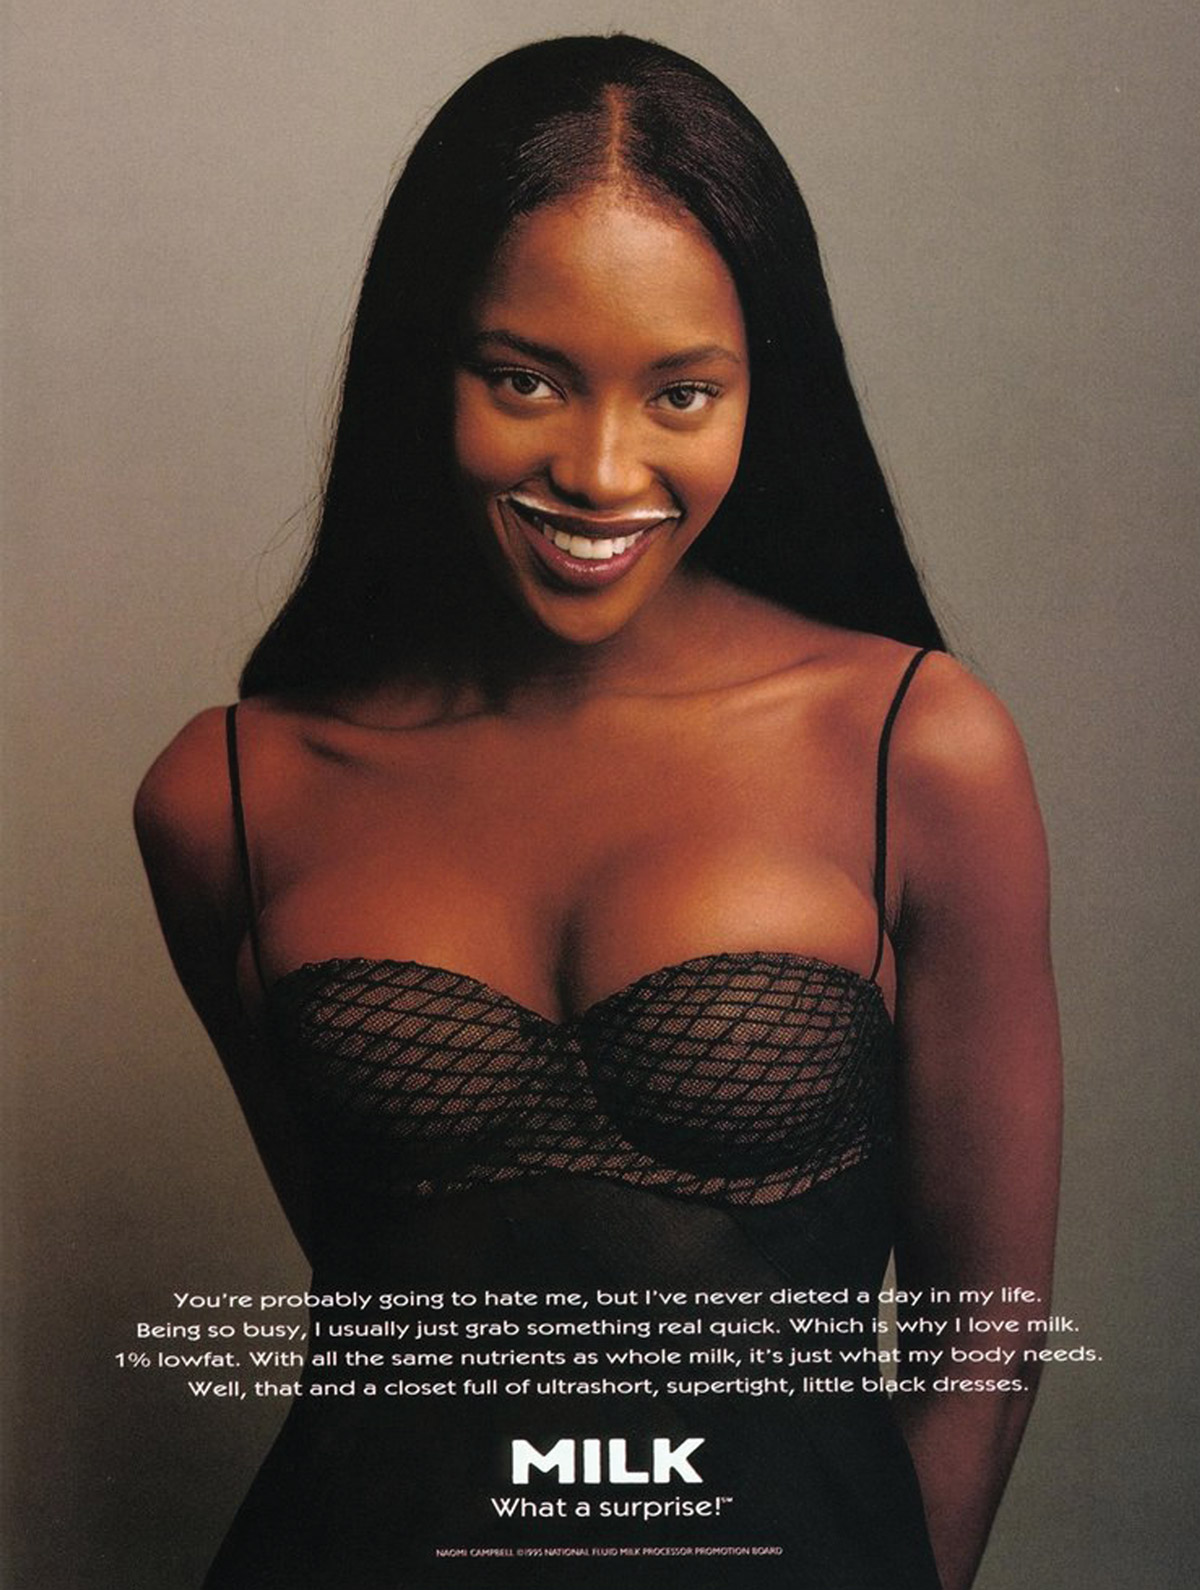 A nineteen ninety five American milk advertisement, commissioned by the National Fluid Milk Processor Promotion Board, featuring Naomi Campbell with a mustache of milk. The text reads “You’re probably going to hate me, but I’ve never dieted a day in my life. Being so busy, I usually just grab something real quick. Which is why I love milk. One percent lowfat. With all the same nutrients as whole milk, it’s just what my body needs. Well, that and a closet full of ultrashort, supertight, little black dresses.”